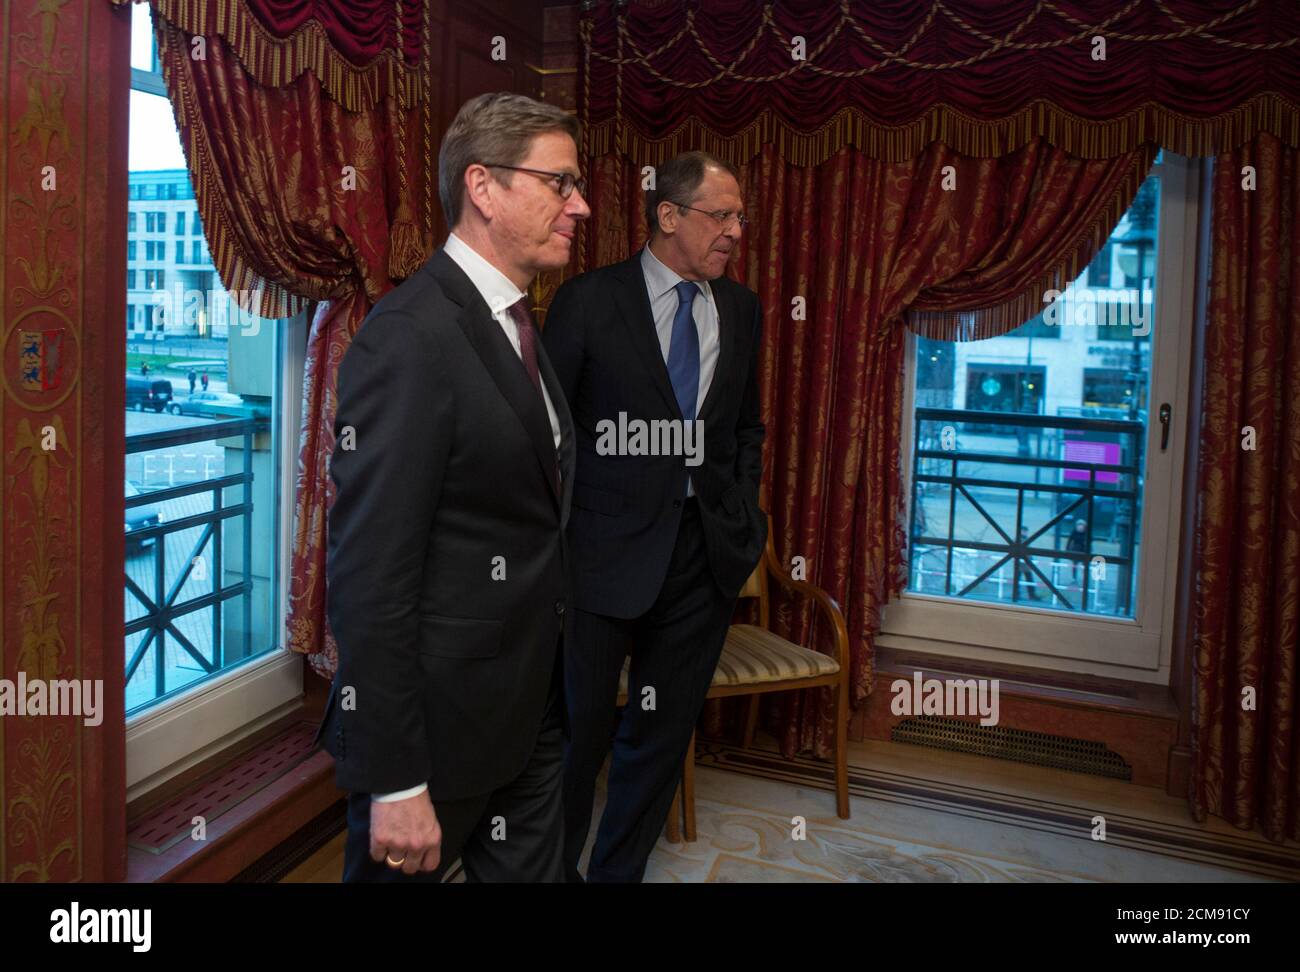 German Foreign Minister Guido Westerwelle (L) meets his Russian counterpart Sergei Lavrov in Berlin February 26, 2013.  REUTERS/Thomas Peter  (GERMANY  - Tags: POLITICS) Stock Photo